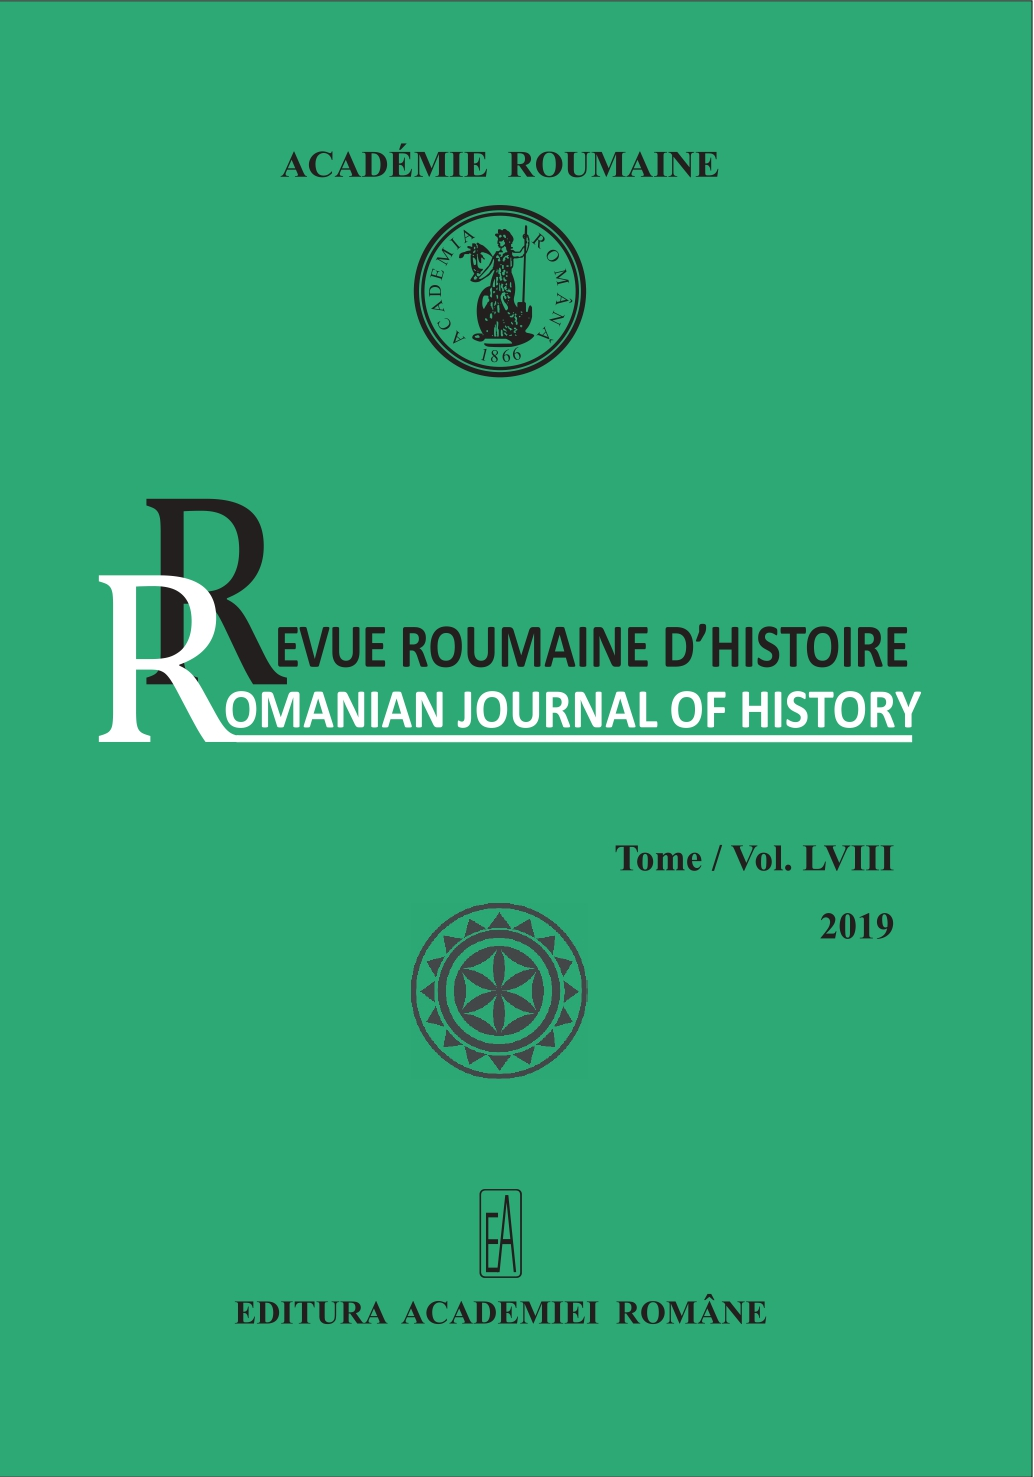 The Terminology Reflecting the Ethnic Identity of the Romanian Voivodeships in the Middle Ages and Renaissance